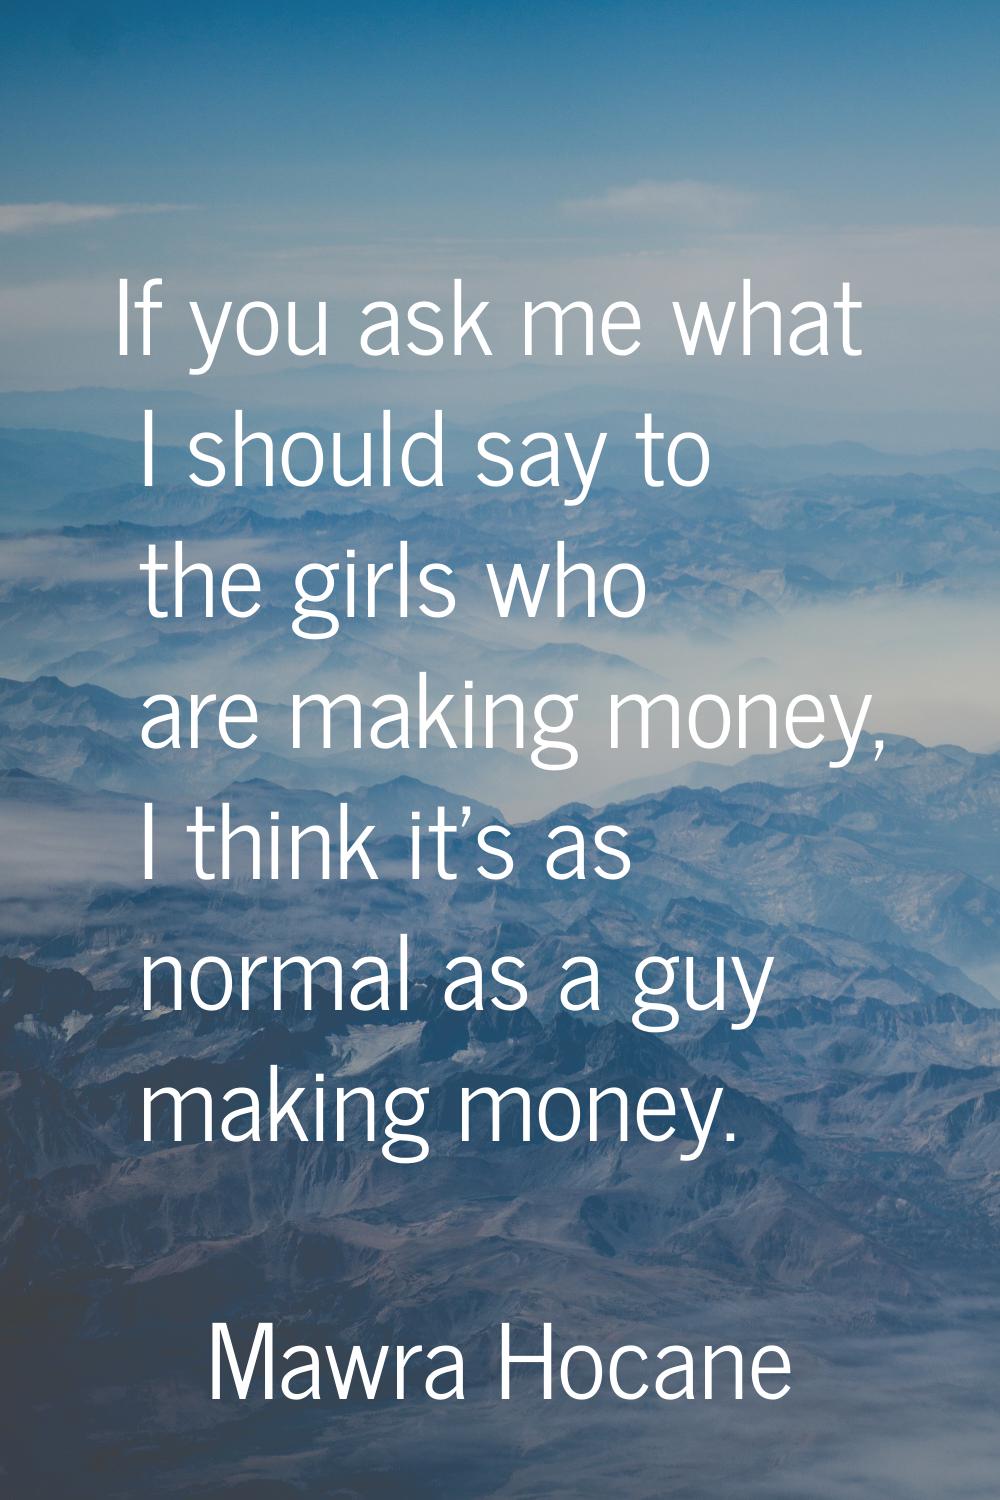 If you ask me what I should say to the girls who are making money, I think it's as normal as a guy 